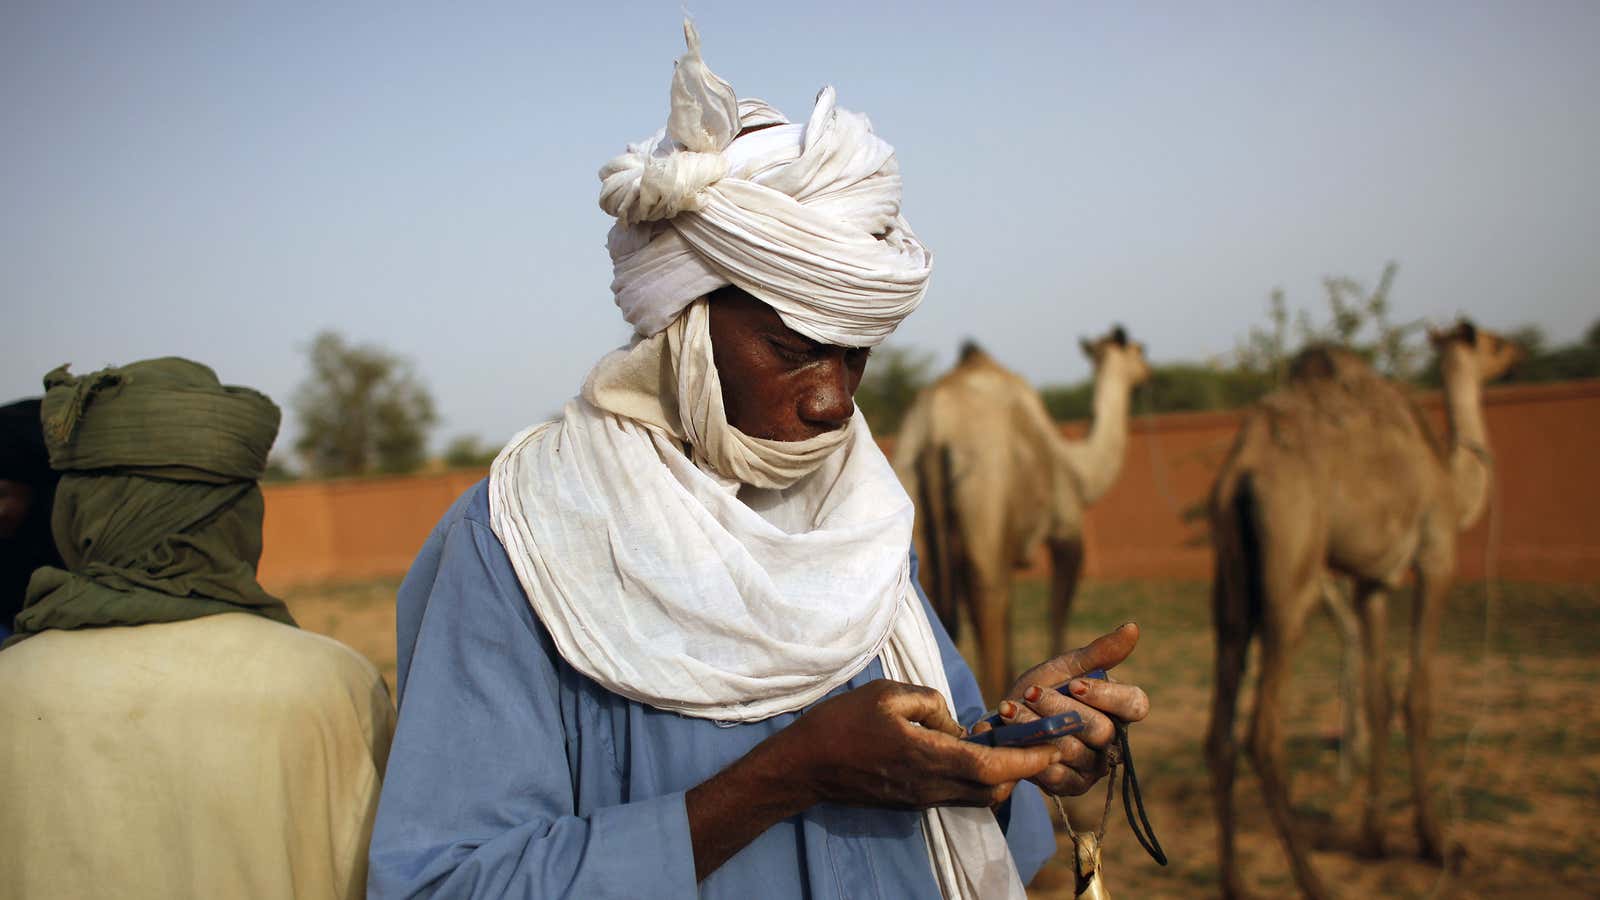 Wikipedia was launched in Niger on July 2, 2012.